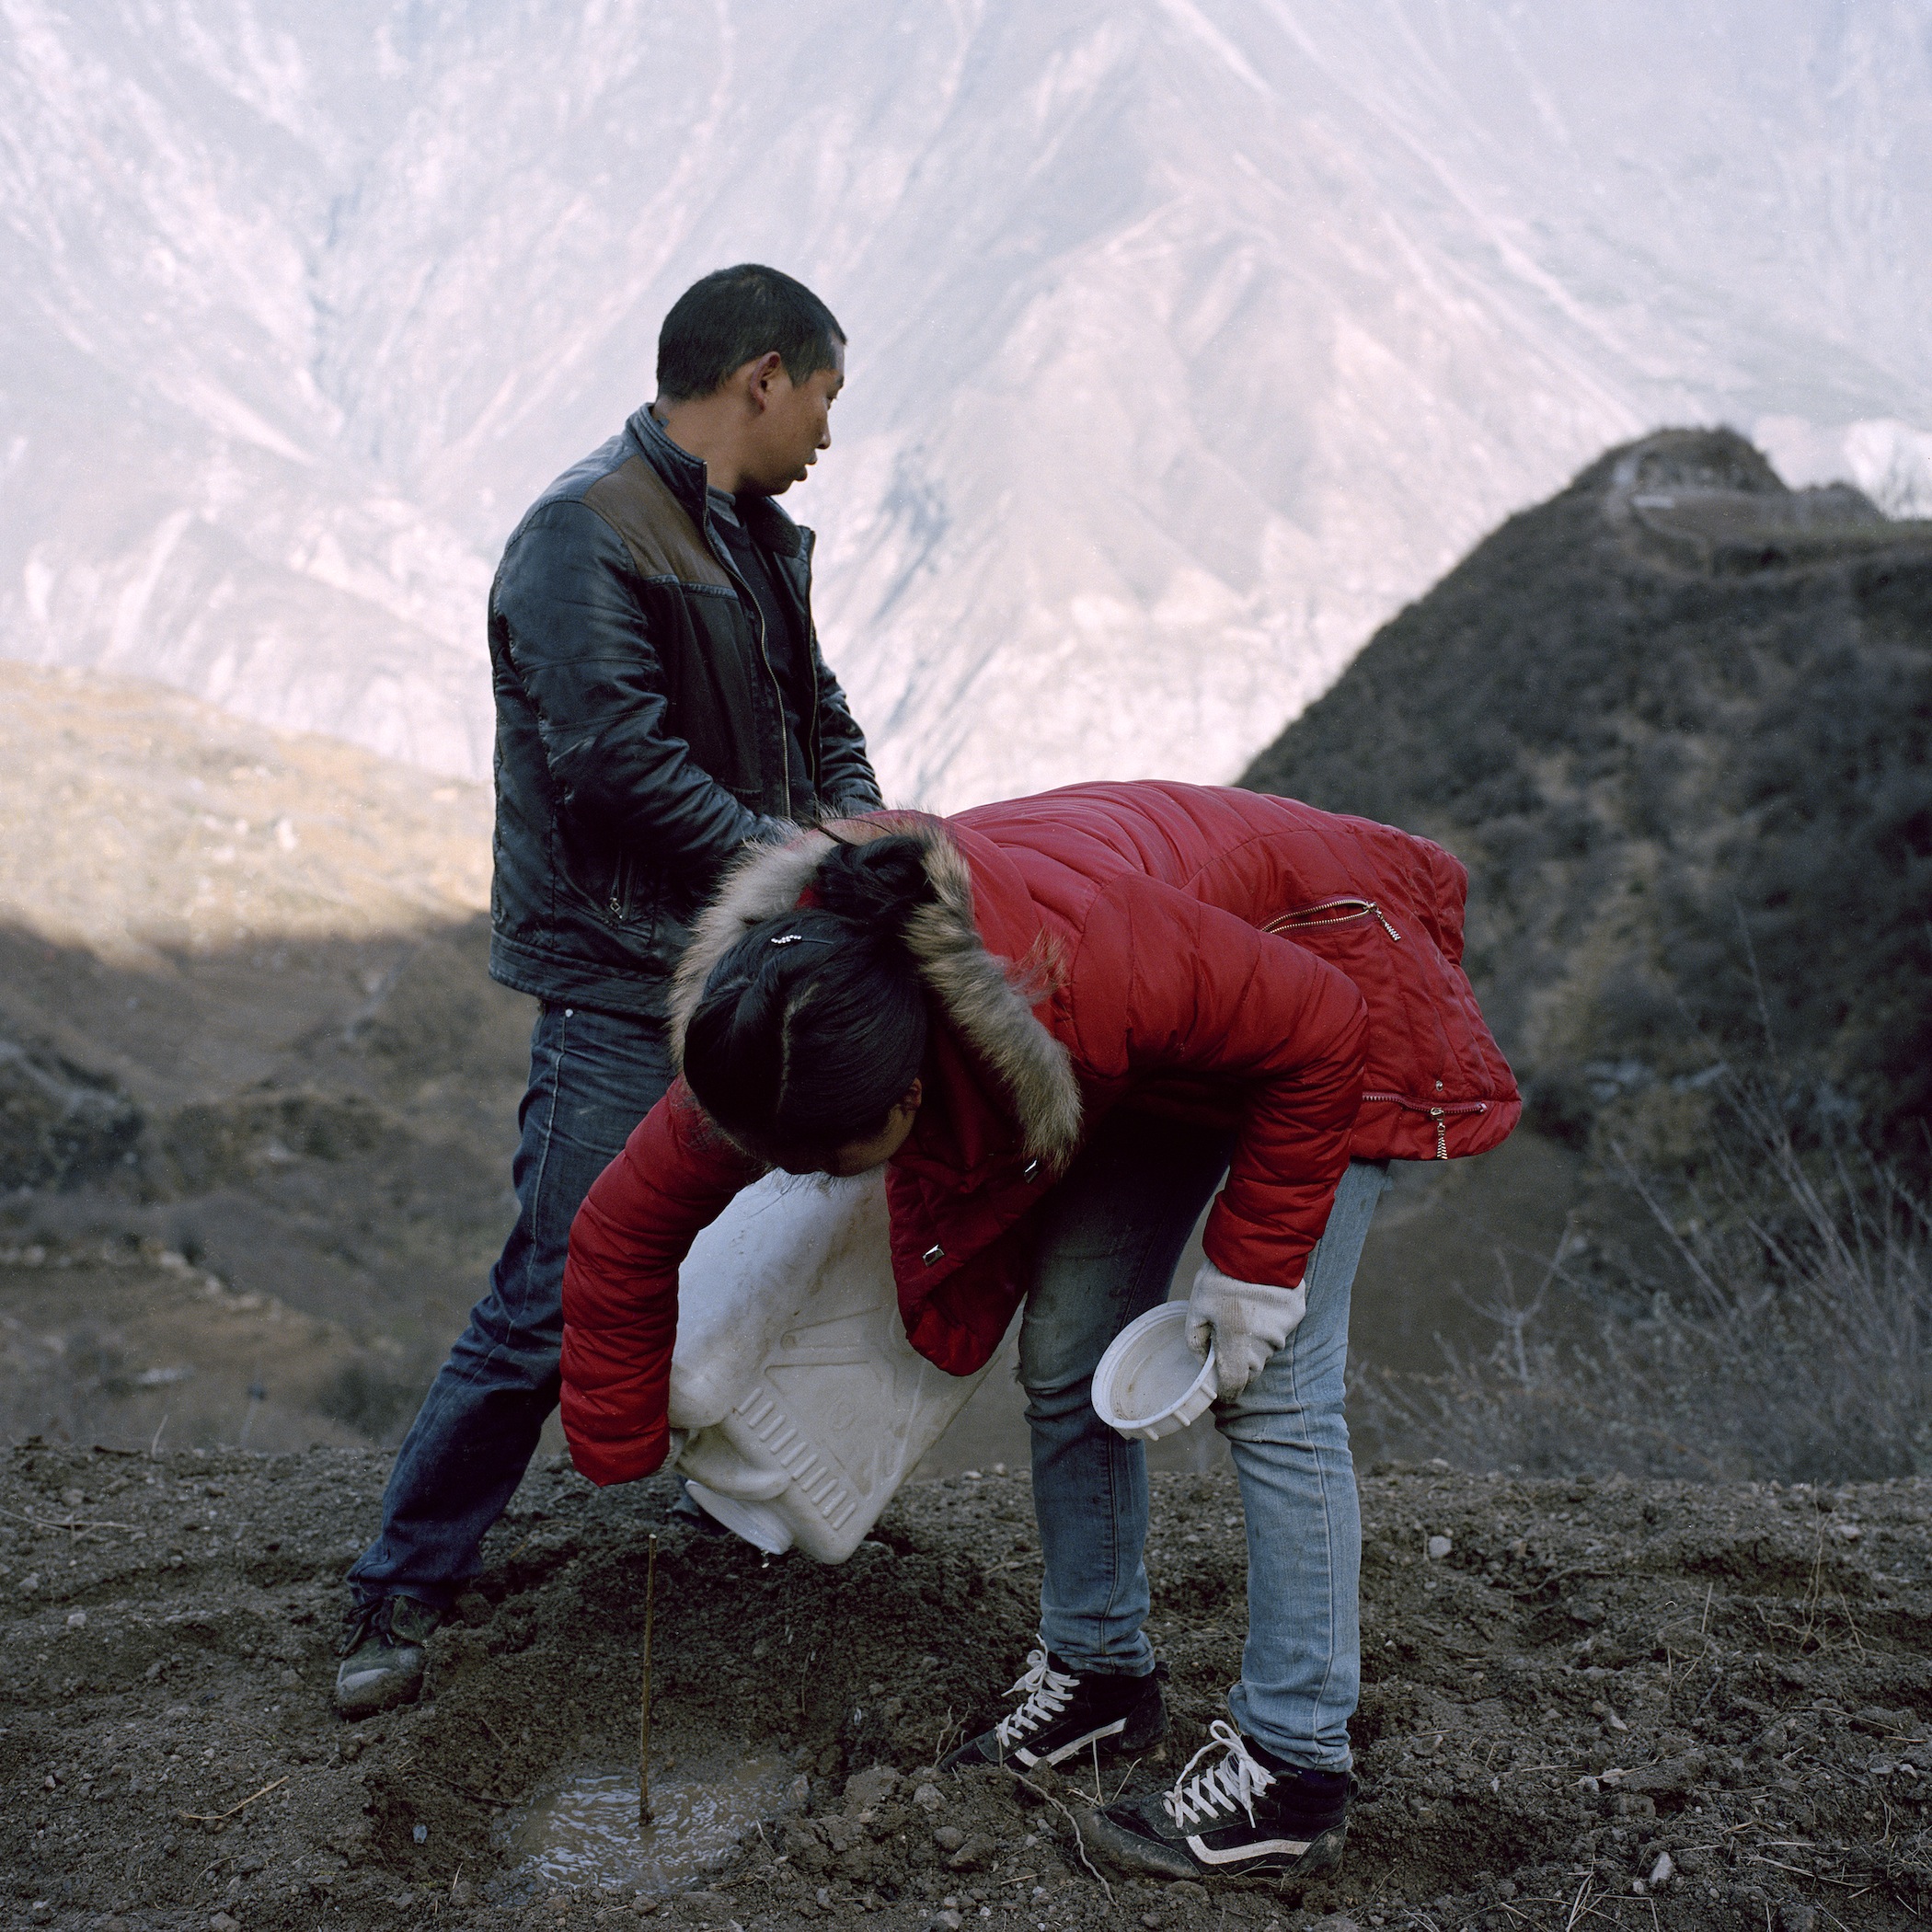 Ma and his Wife Planting Plum Trees, Radish Village, Sichuan, China, April 2016